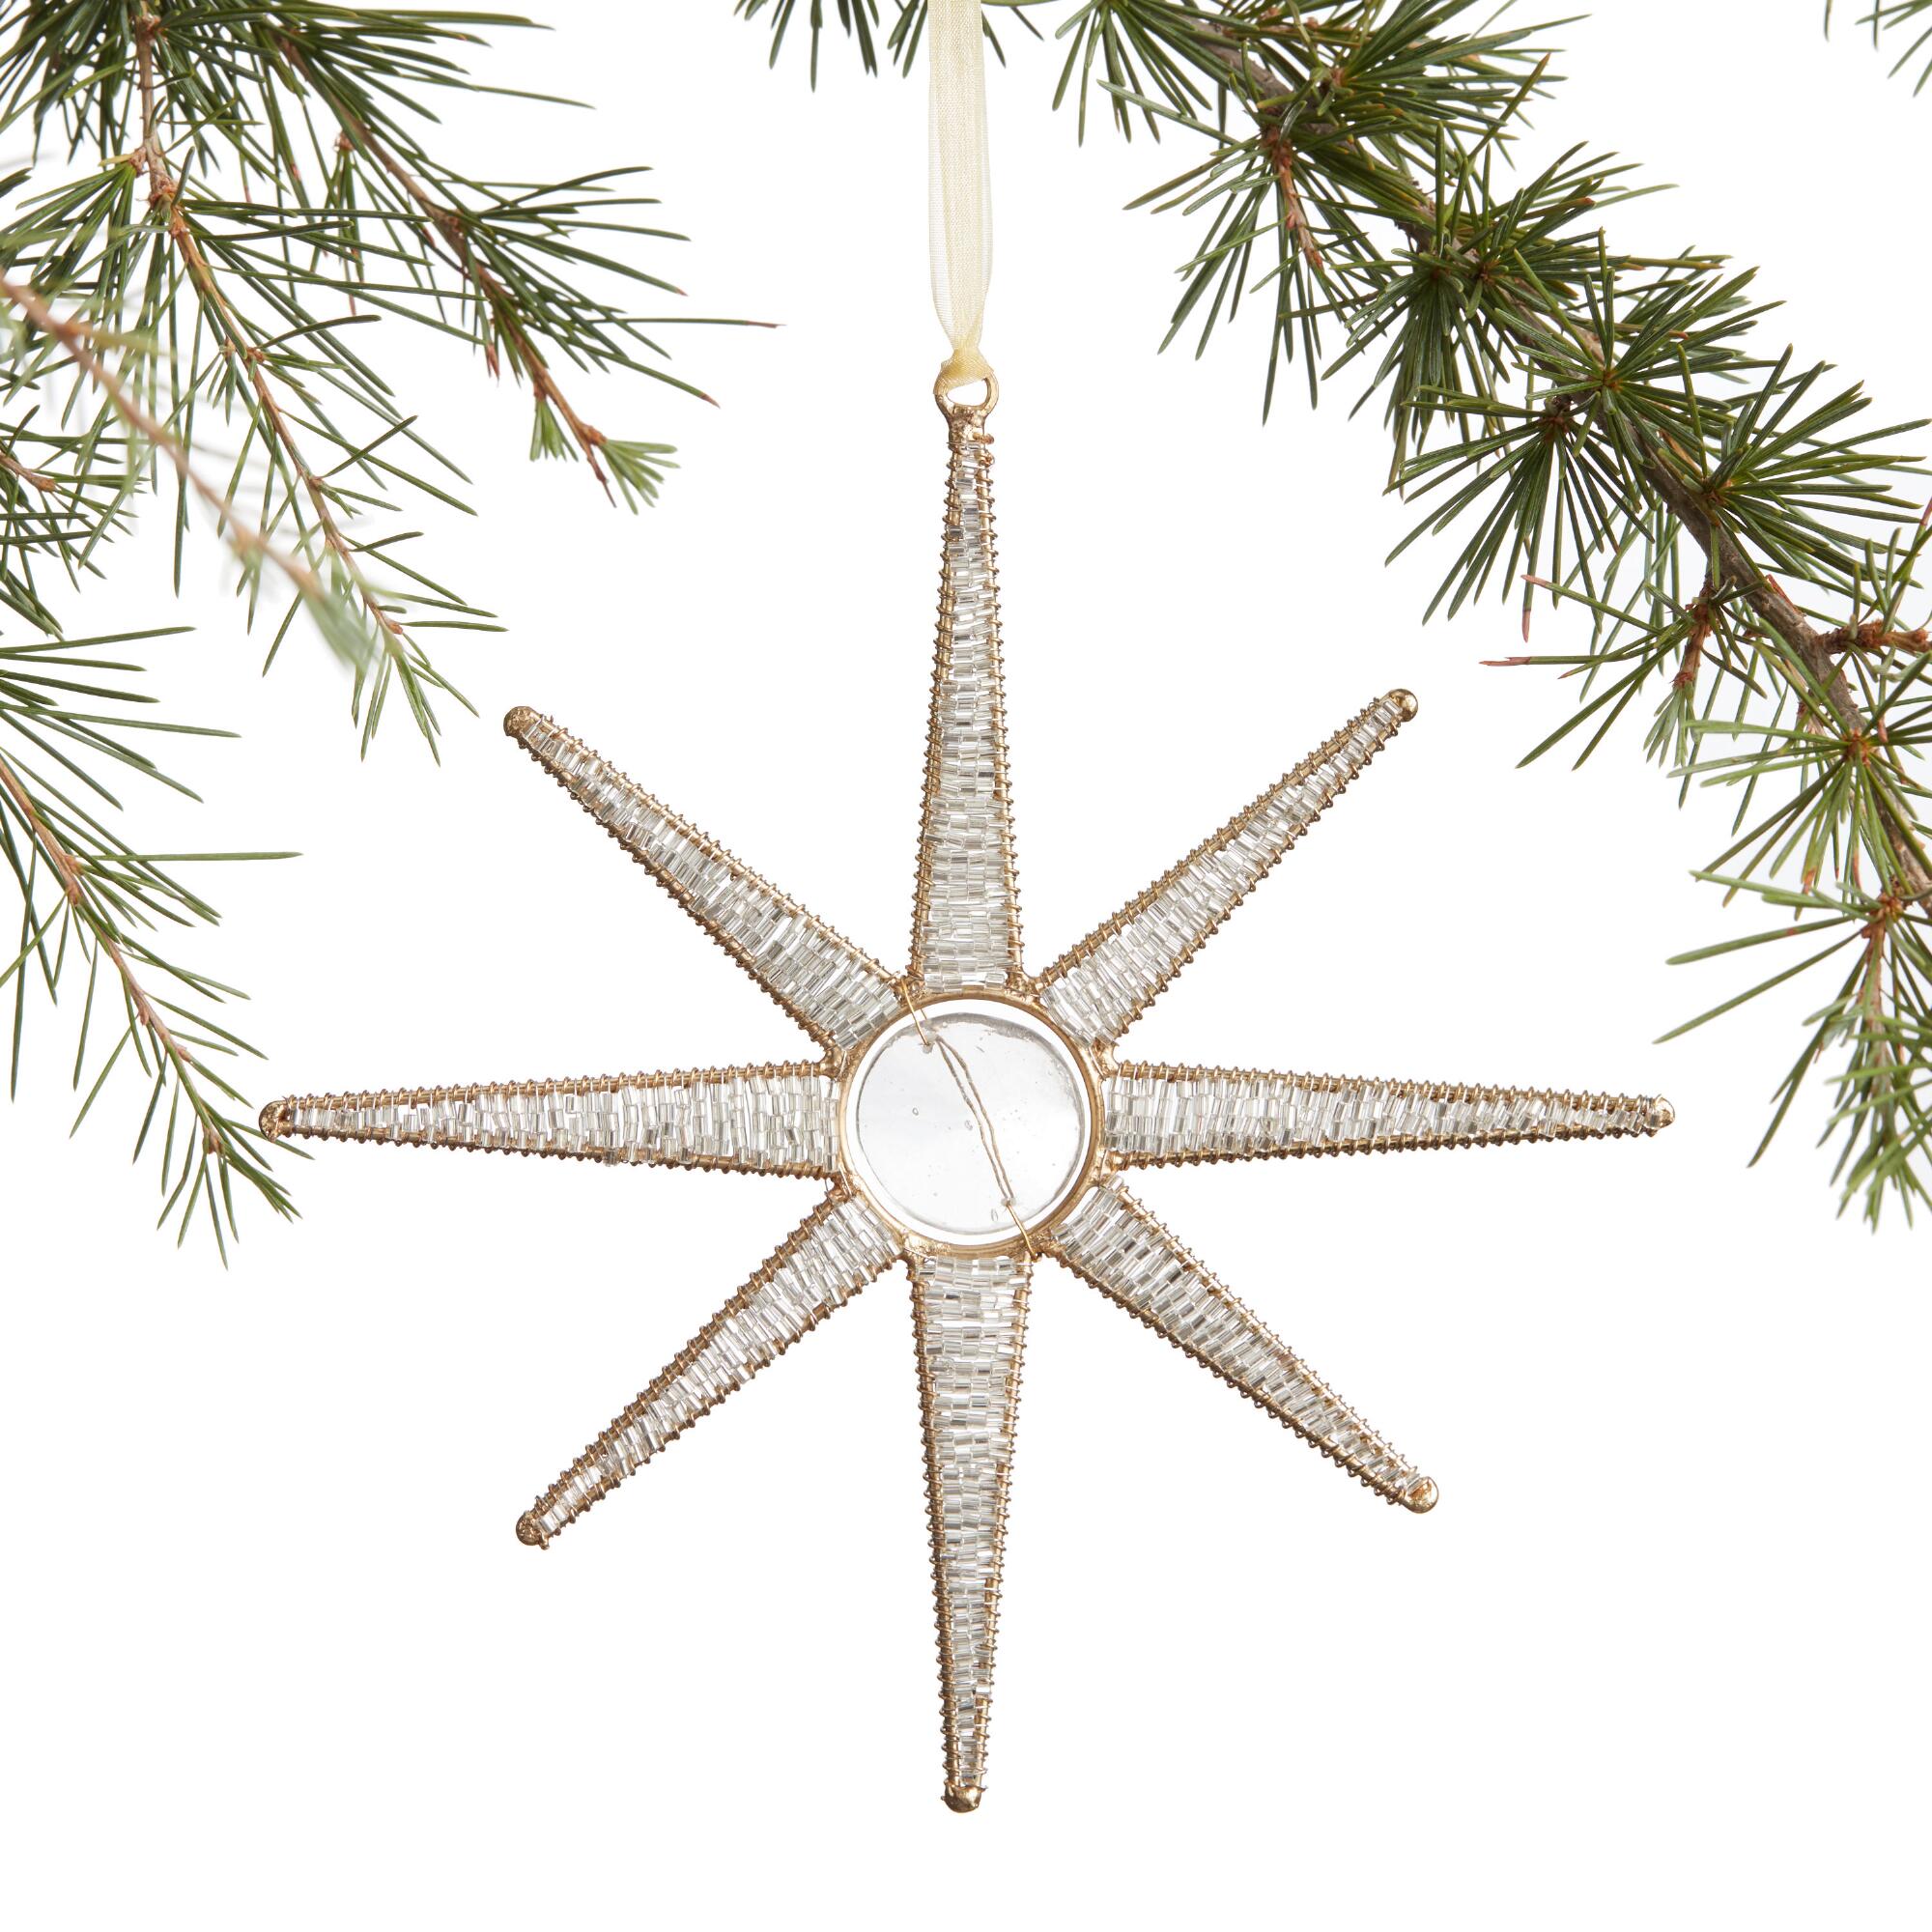 Beaded Metal North Star Ornament: Gold by World Market